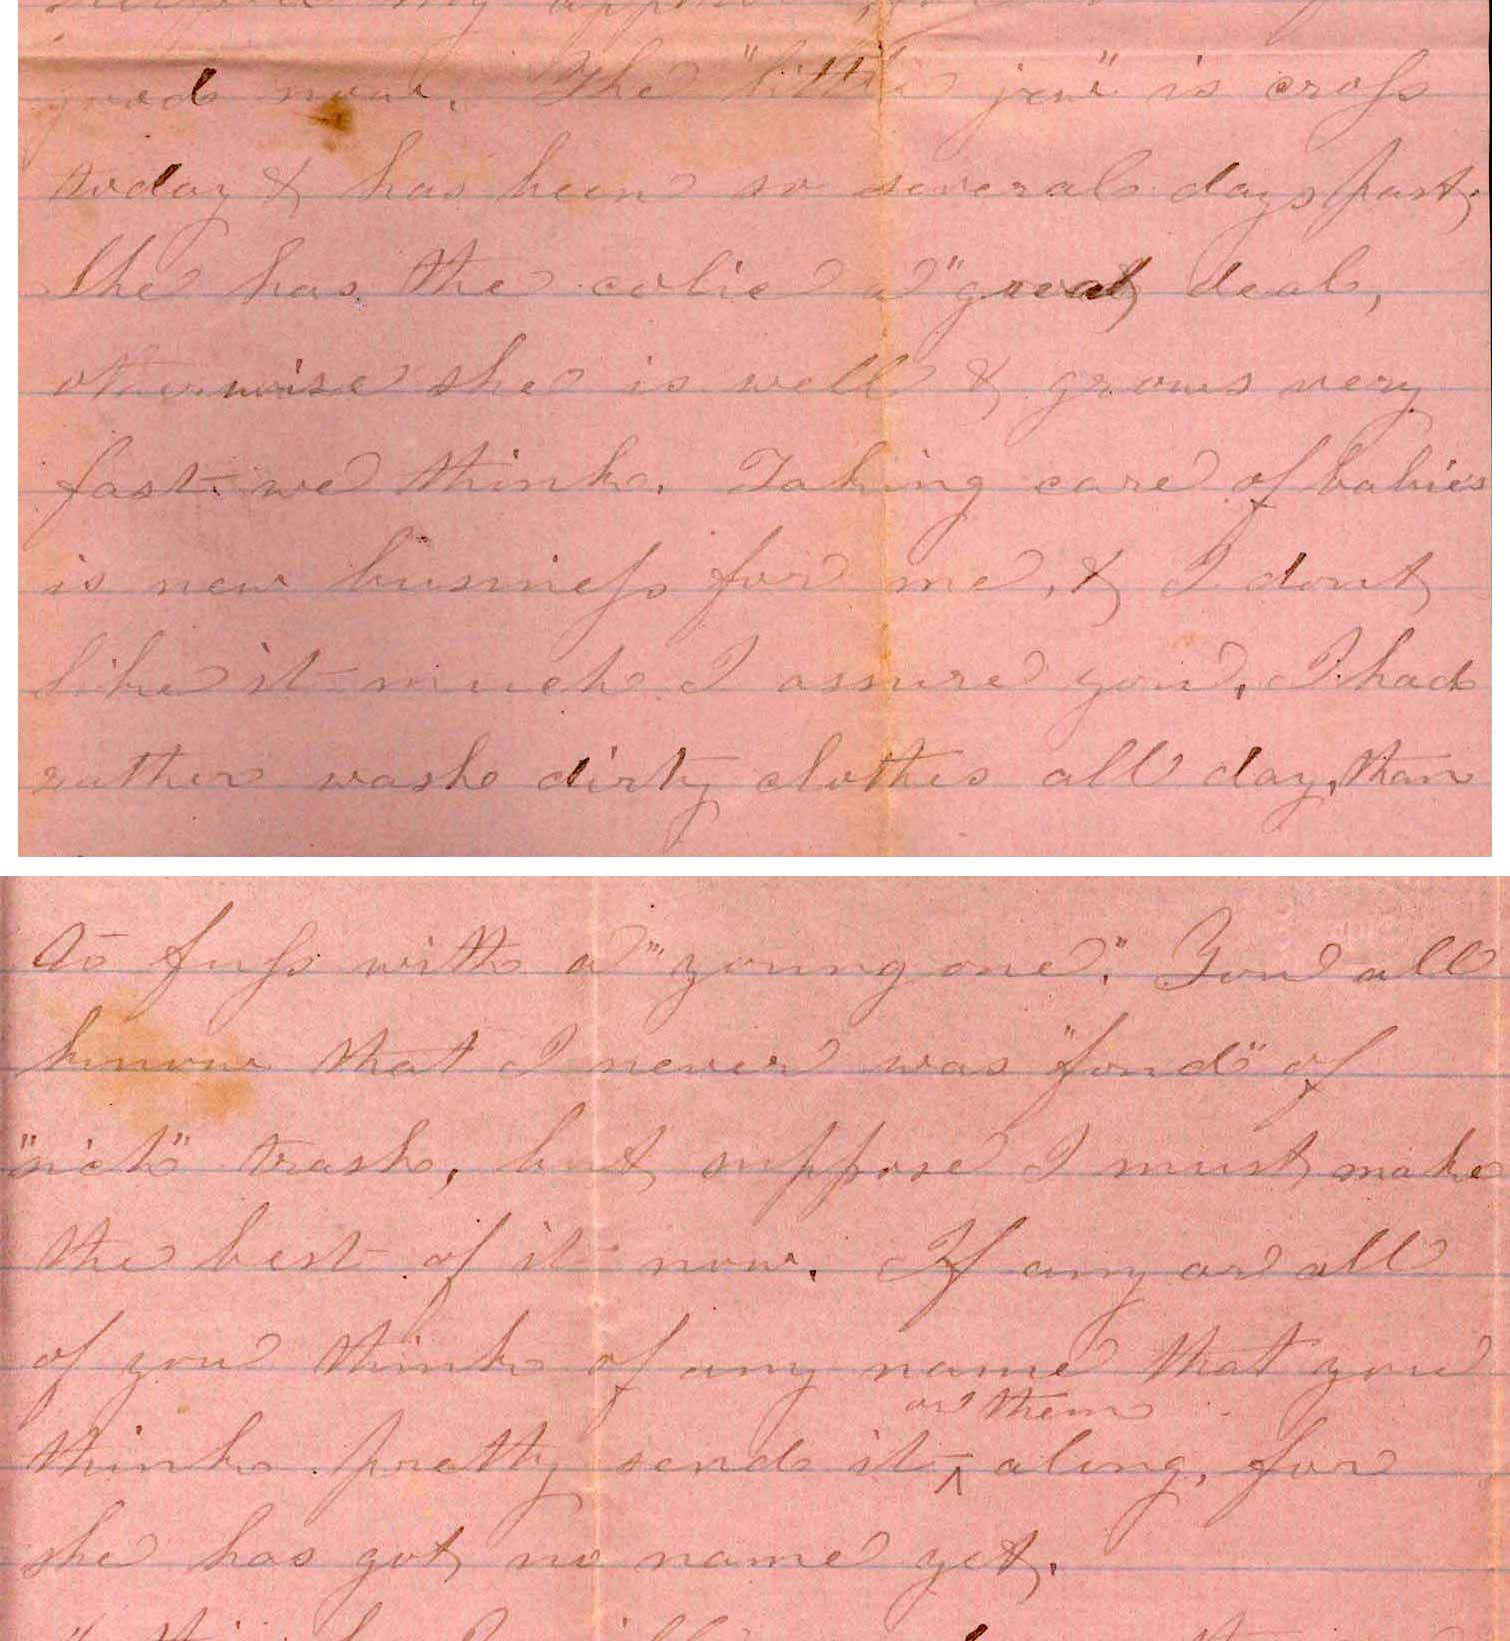 Image of a letter from S. U. to 'Dear Sister'